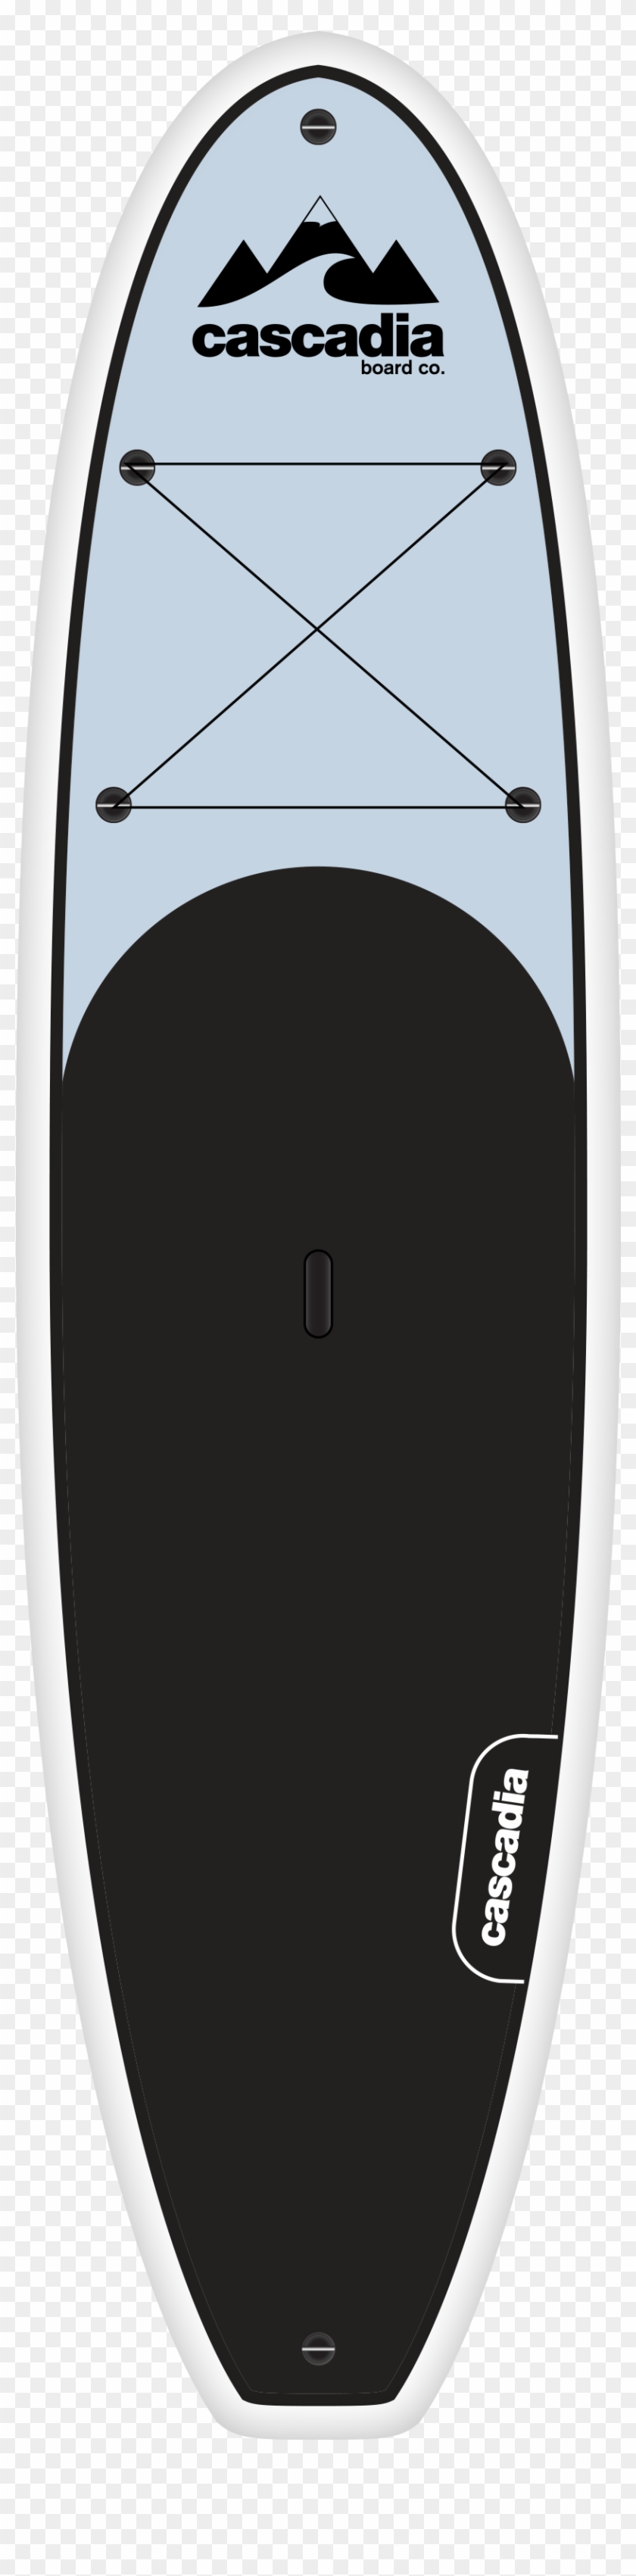 Image Transparent Library Paddle Vector Surfboard - Surfboard #1685332